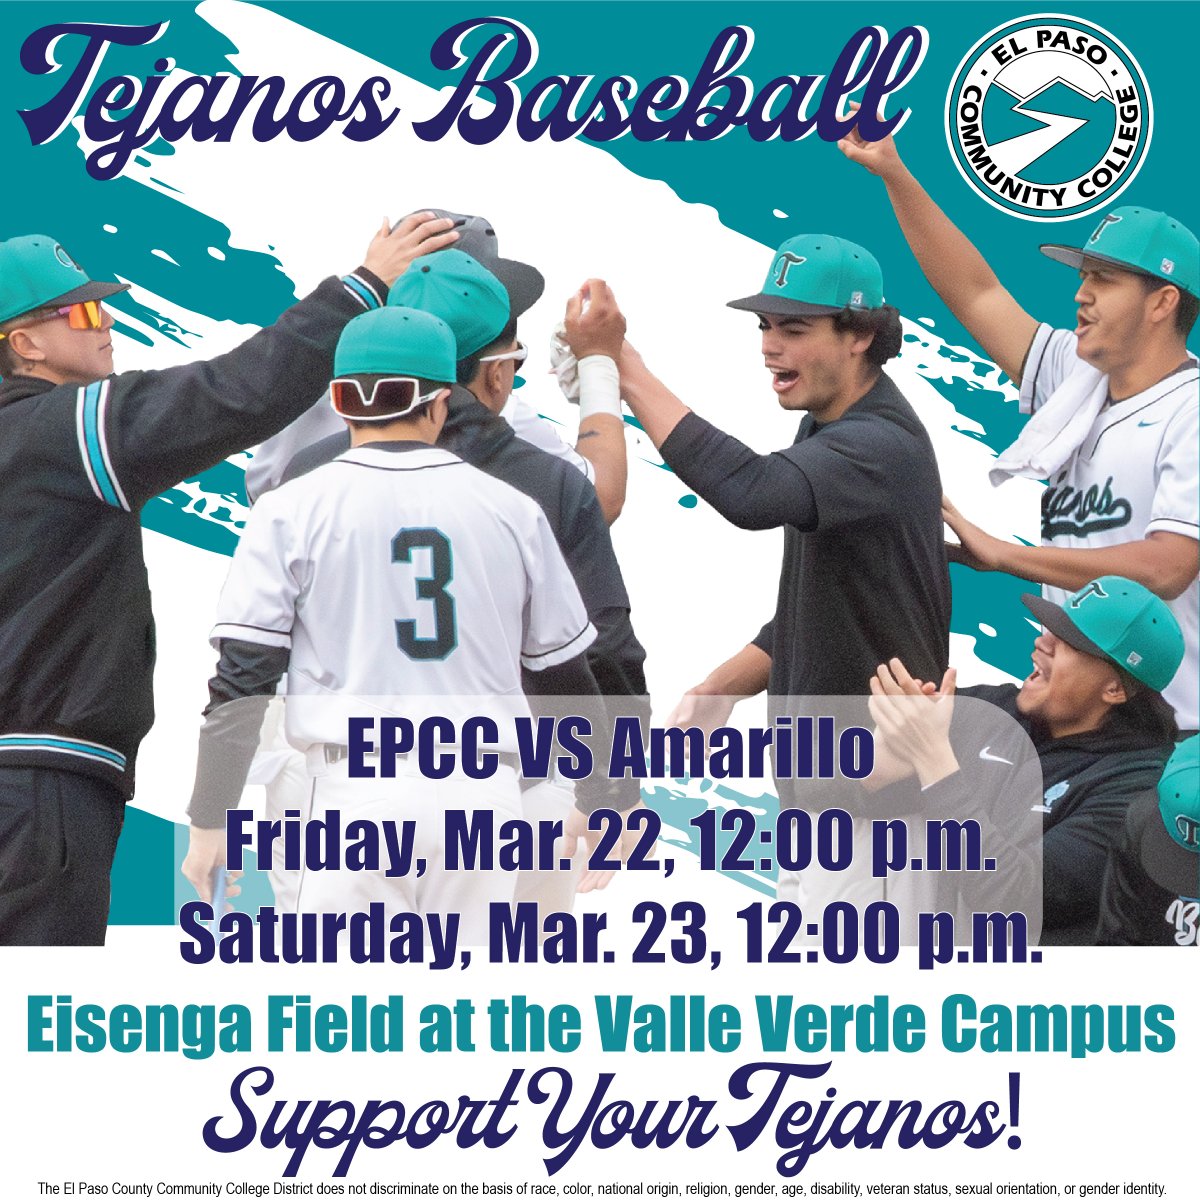 Come out and support your Tejanos this Friday and Saturday! Games will be streamed live at TSBNSPORTS.com #EPCCpride